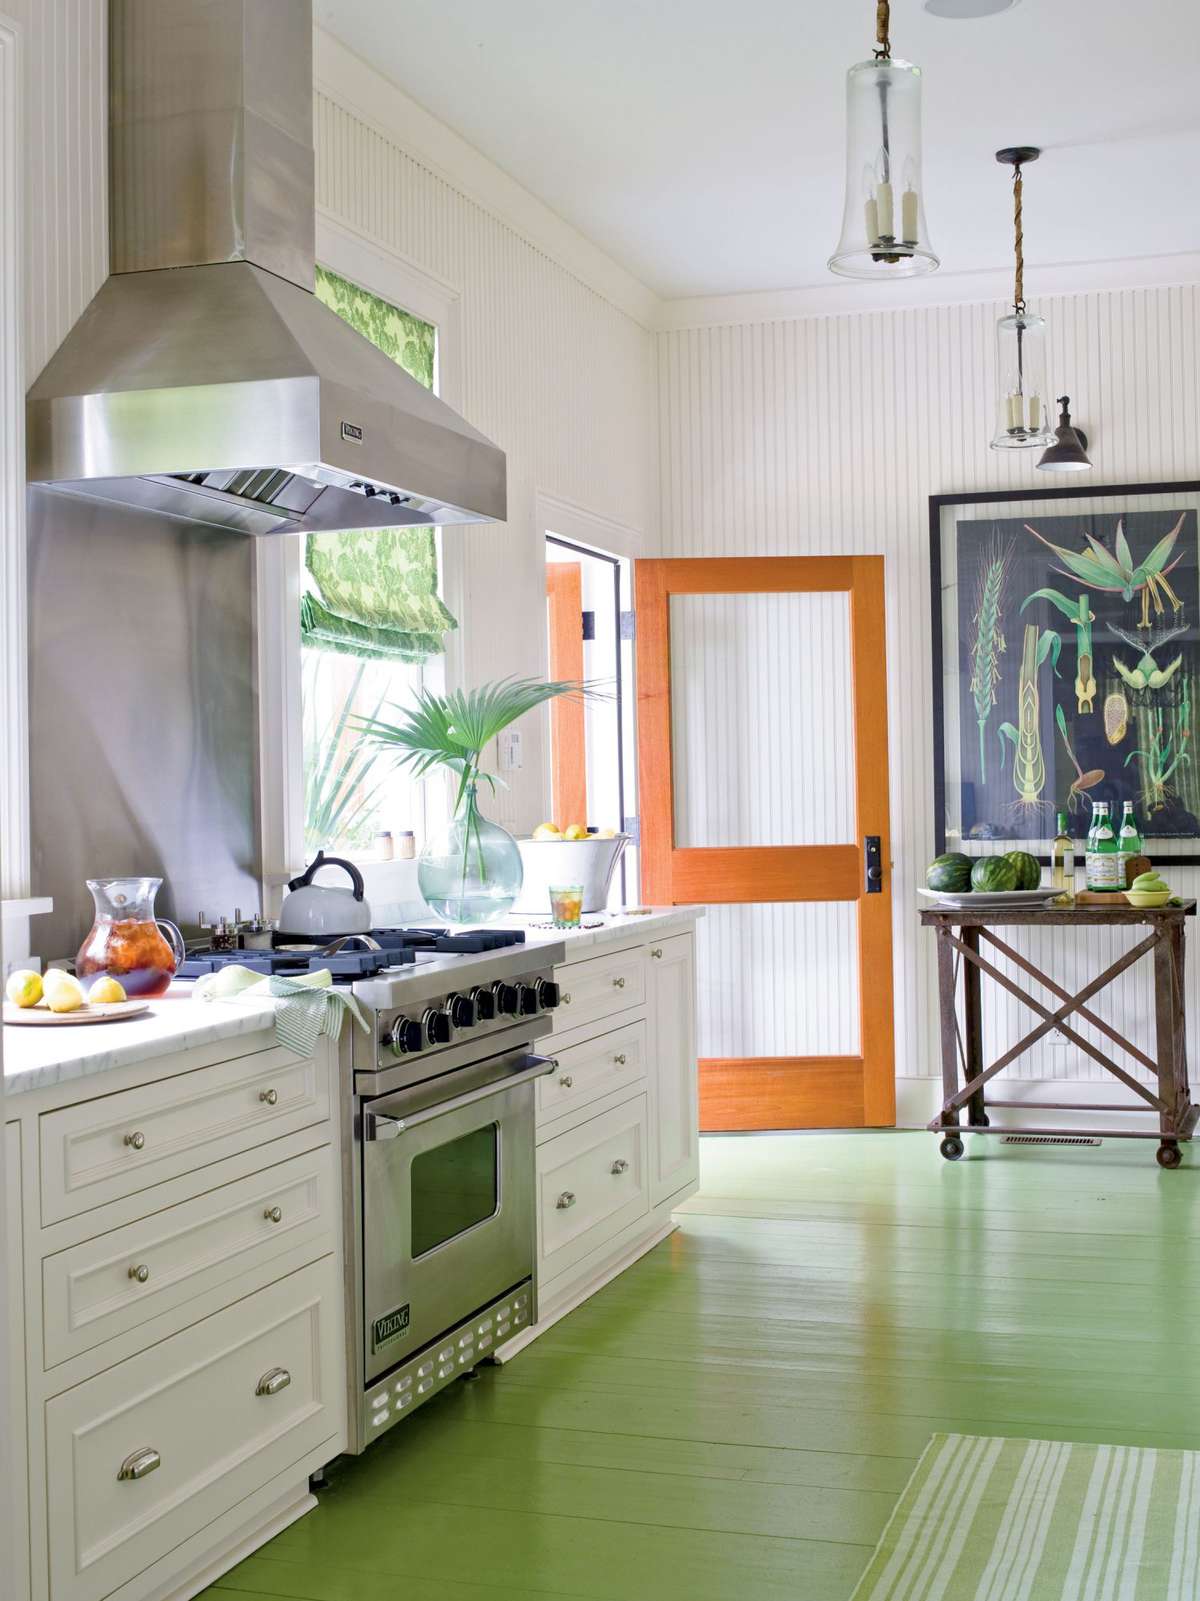 <p>Painted floors only look better with age, and you'll especially love them in a bold color. Kelly green is an ideal counterpoint to wood accents.</p>
                            